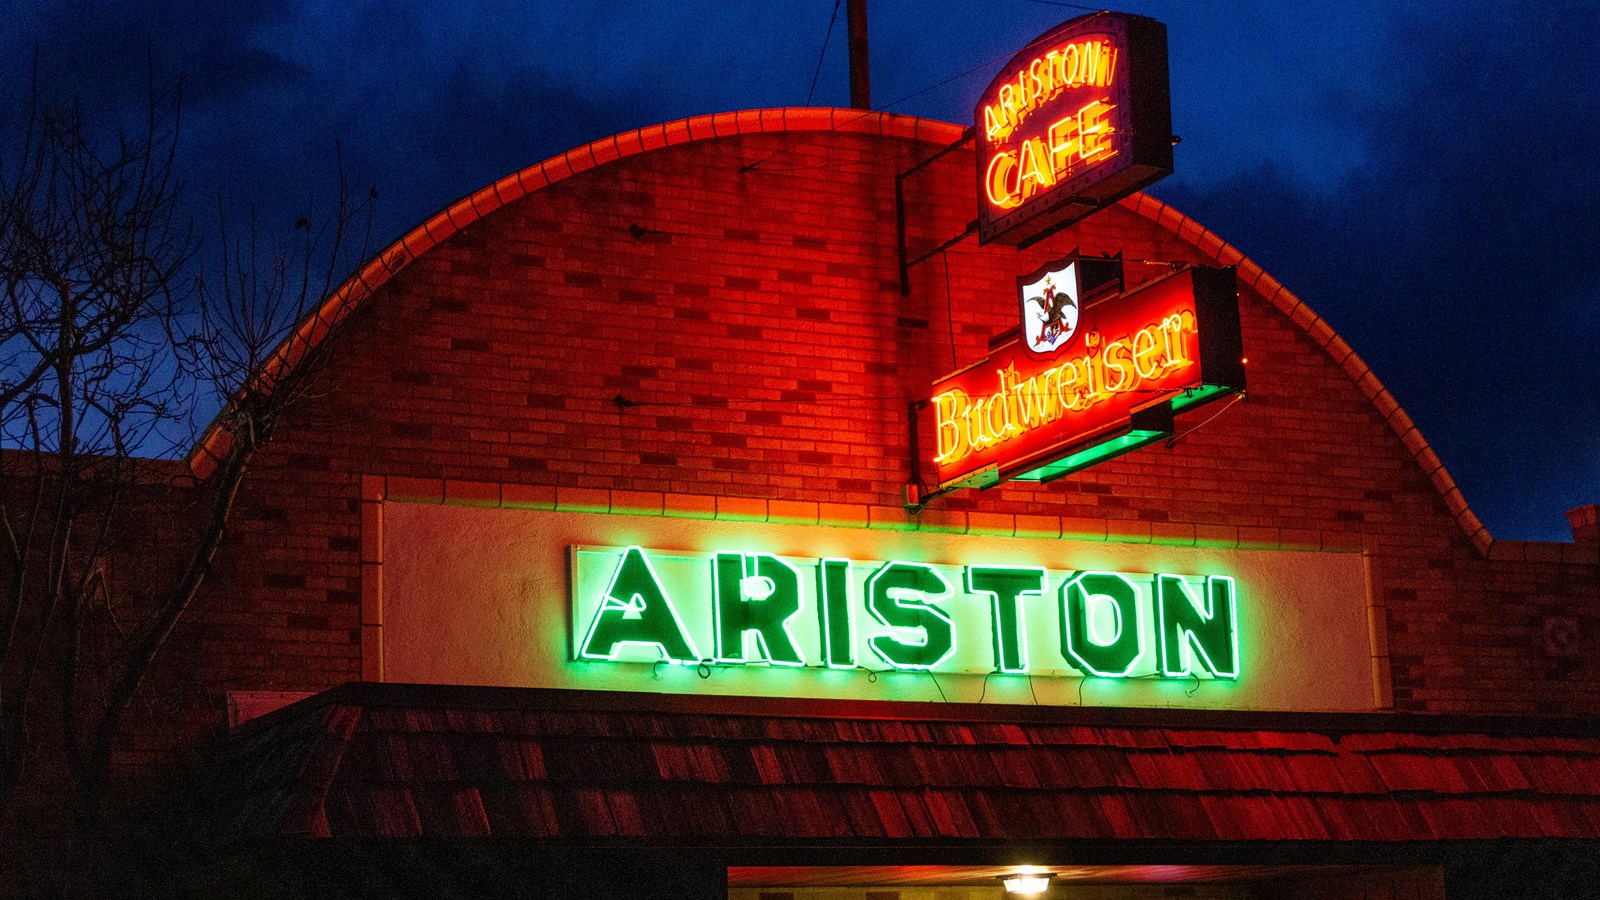 A brick building with a rounded roof with a green neon sign that reads 